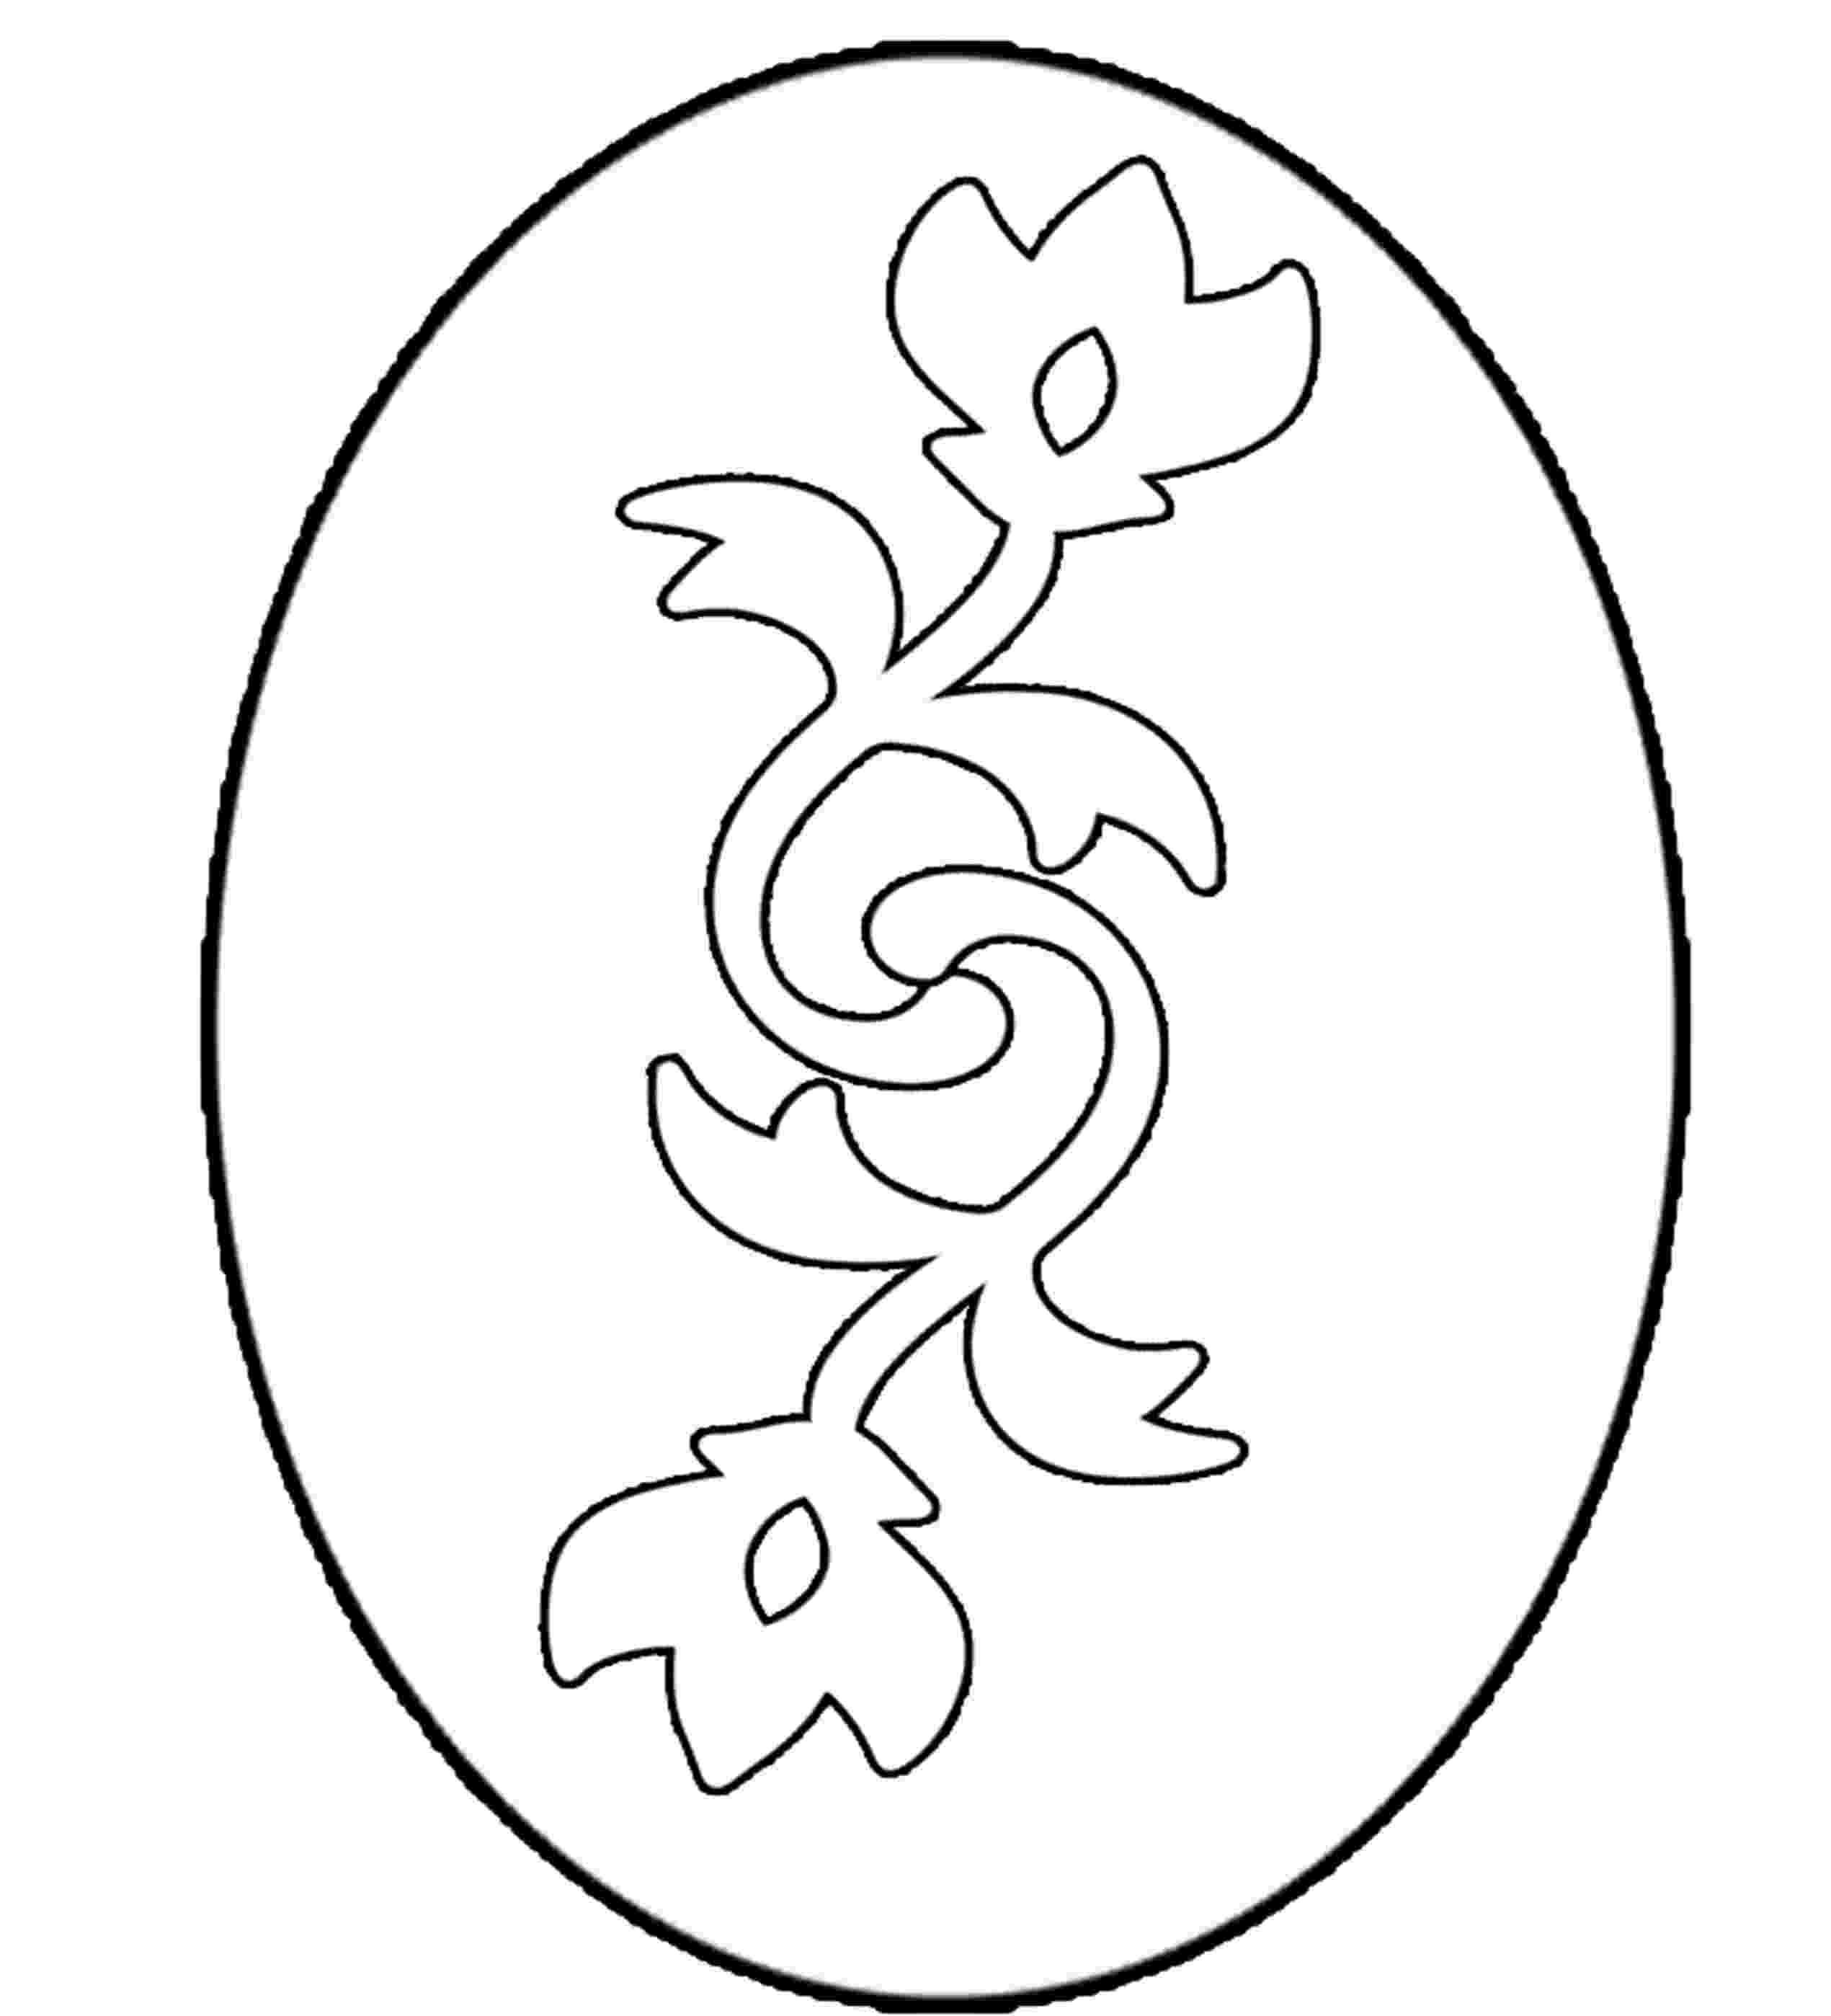 egg coloring pages easter egg coloring pages twopartswhimsicalonepartpeculiar coloring egg pages 1 2